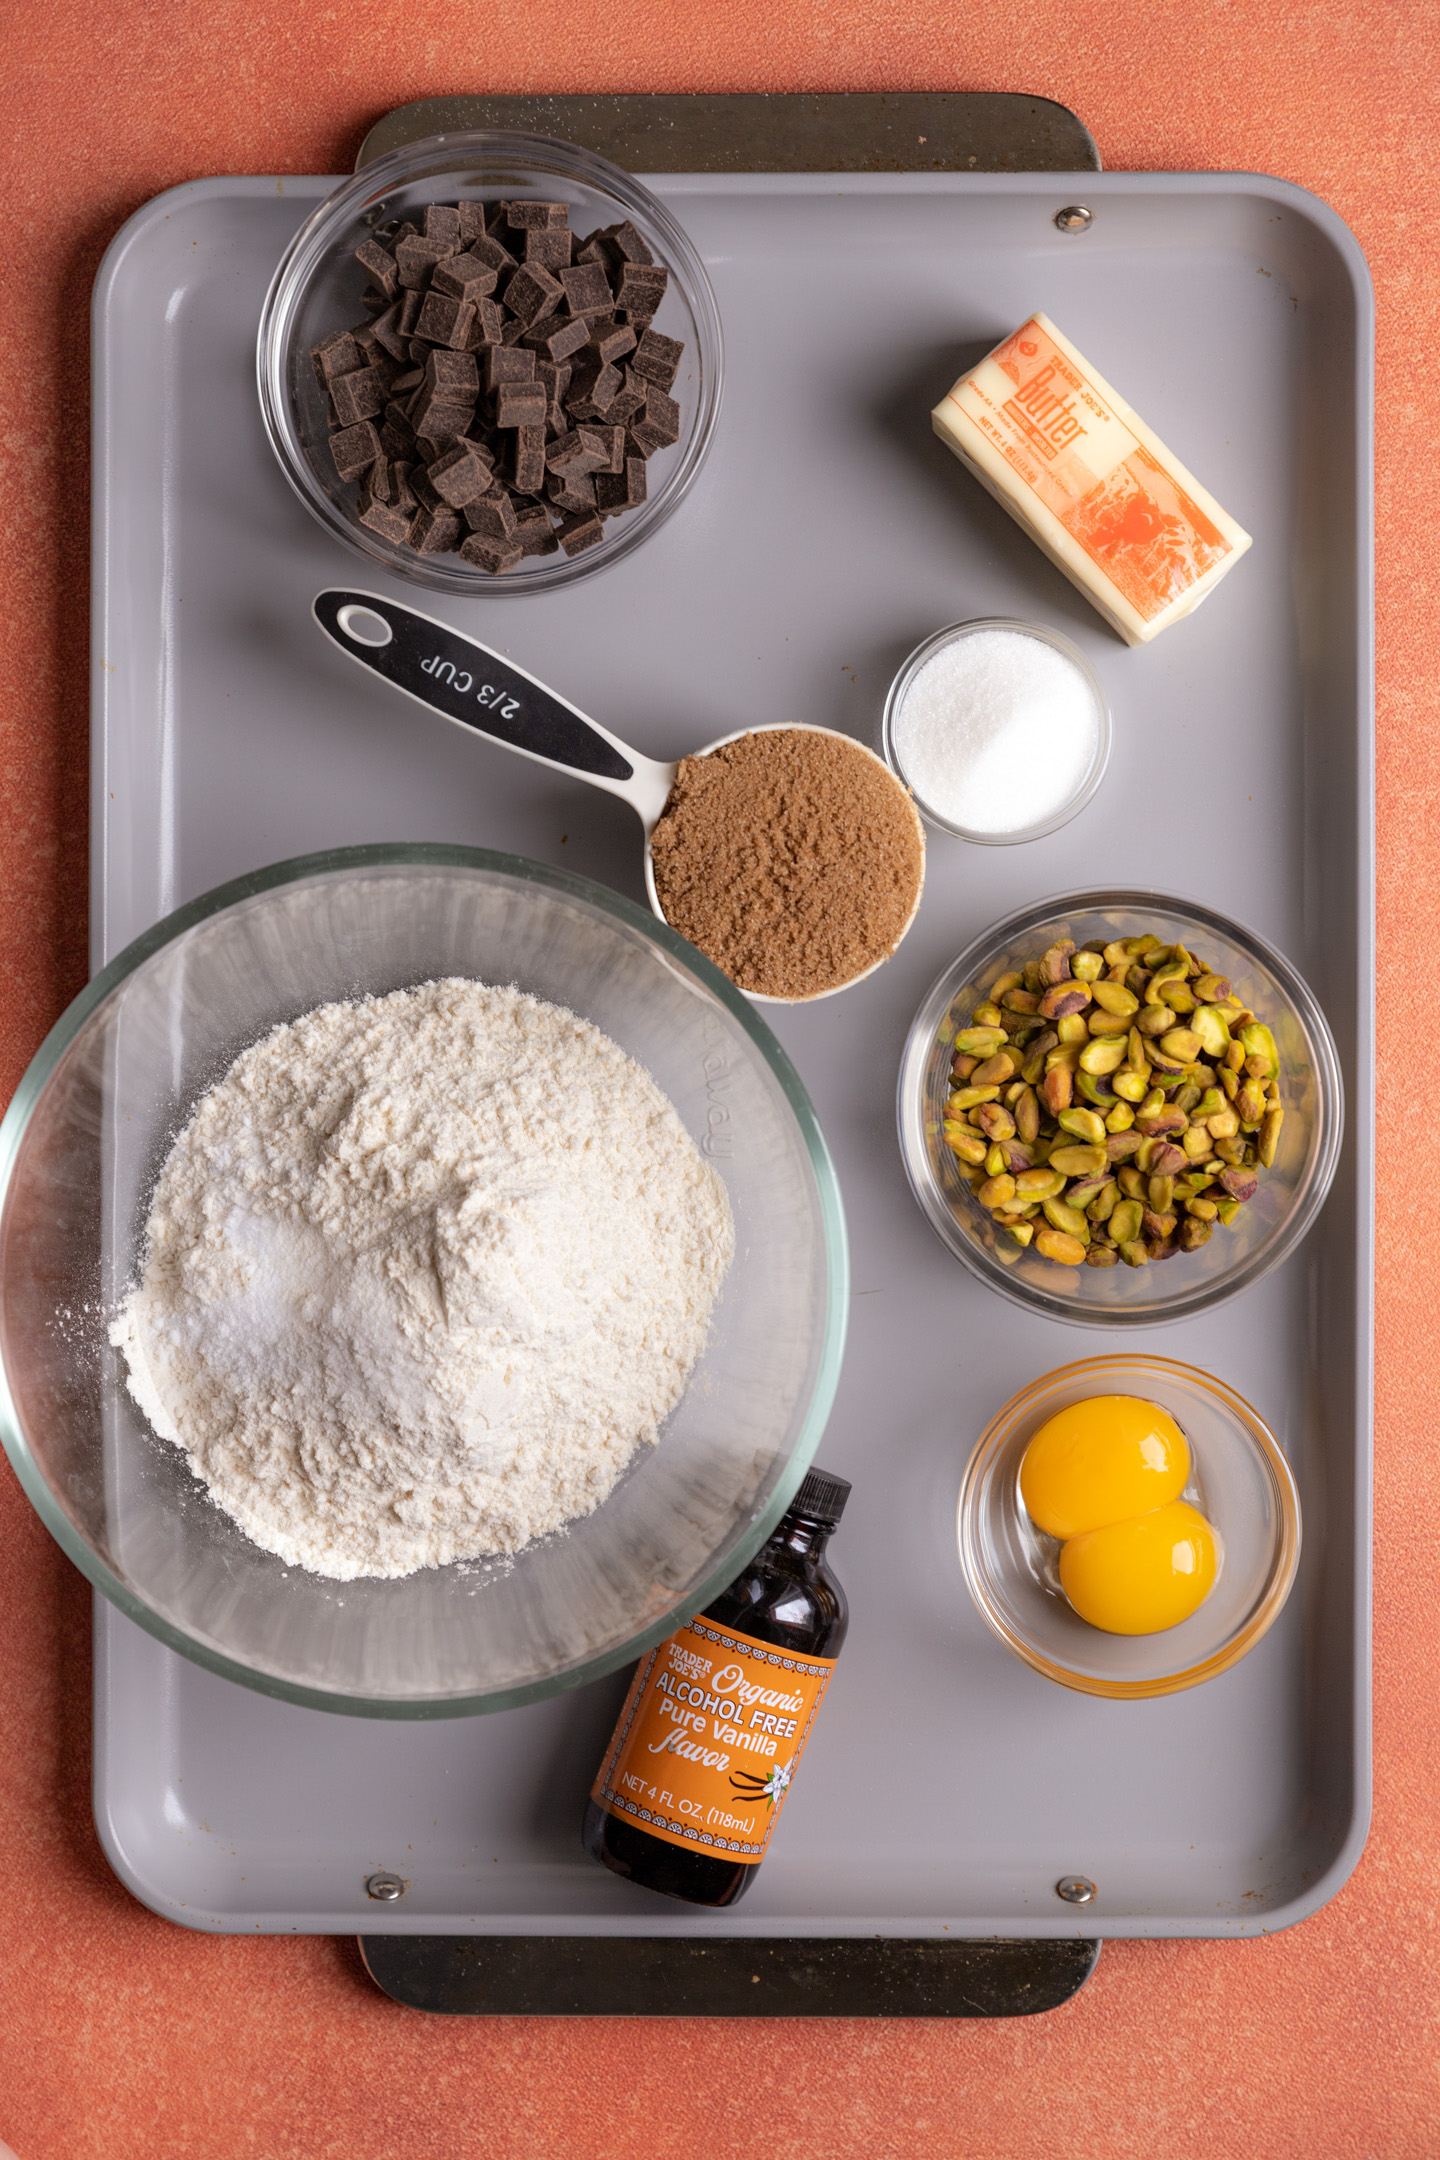 Ingredients for Pistachio Chocolate Chip Cookies.